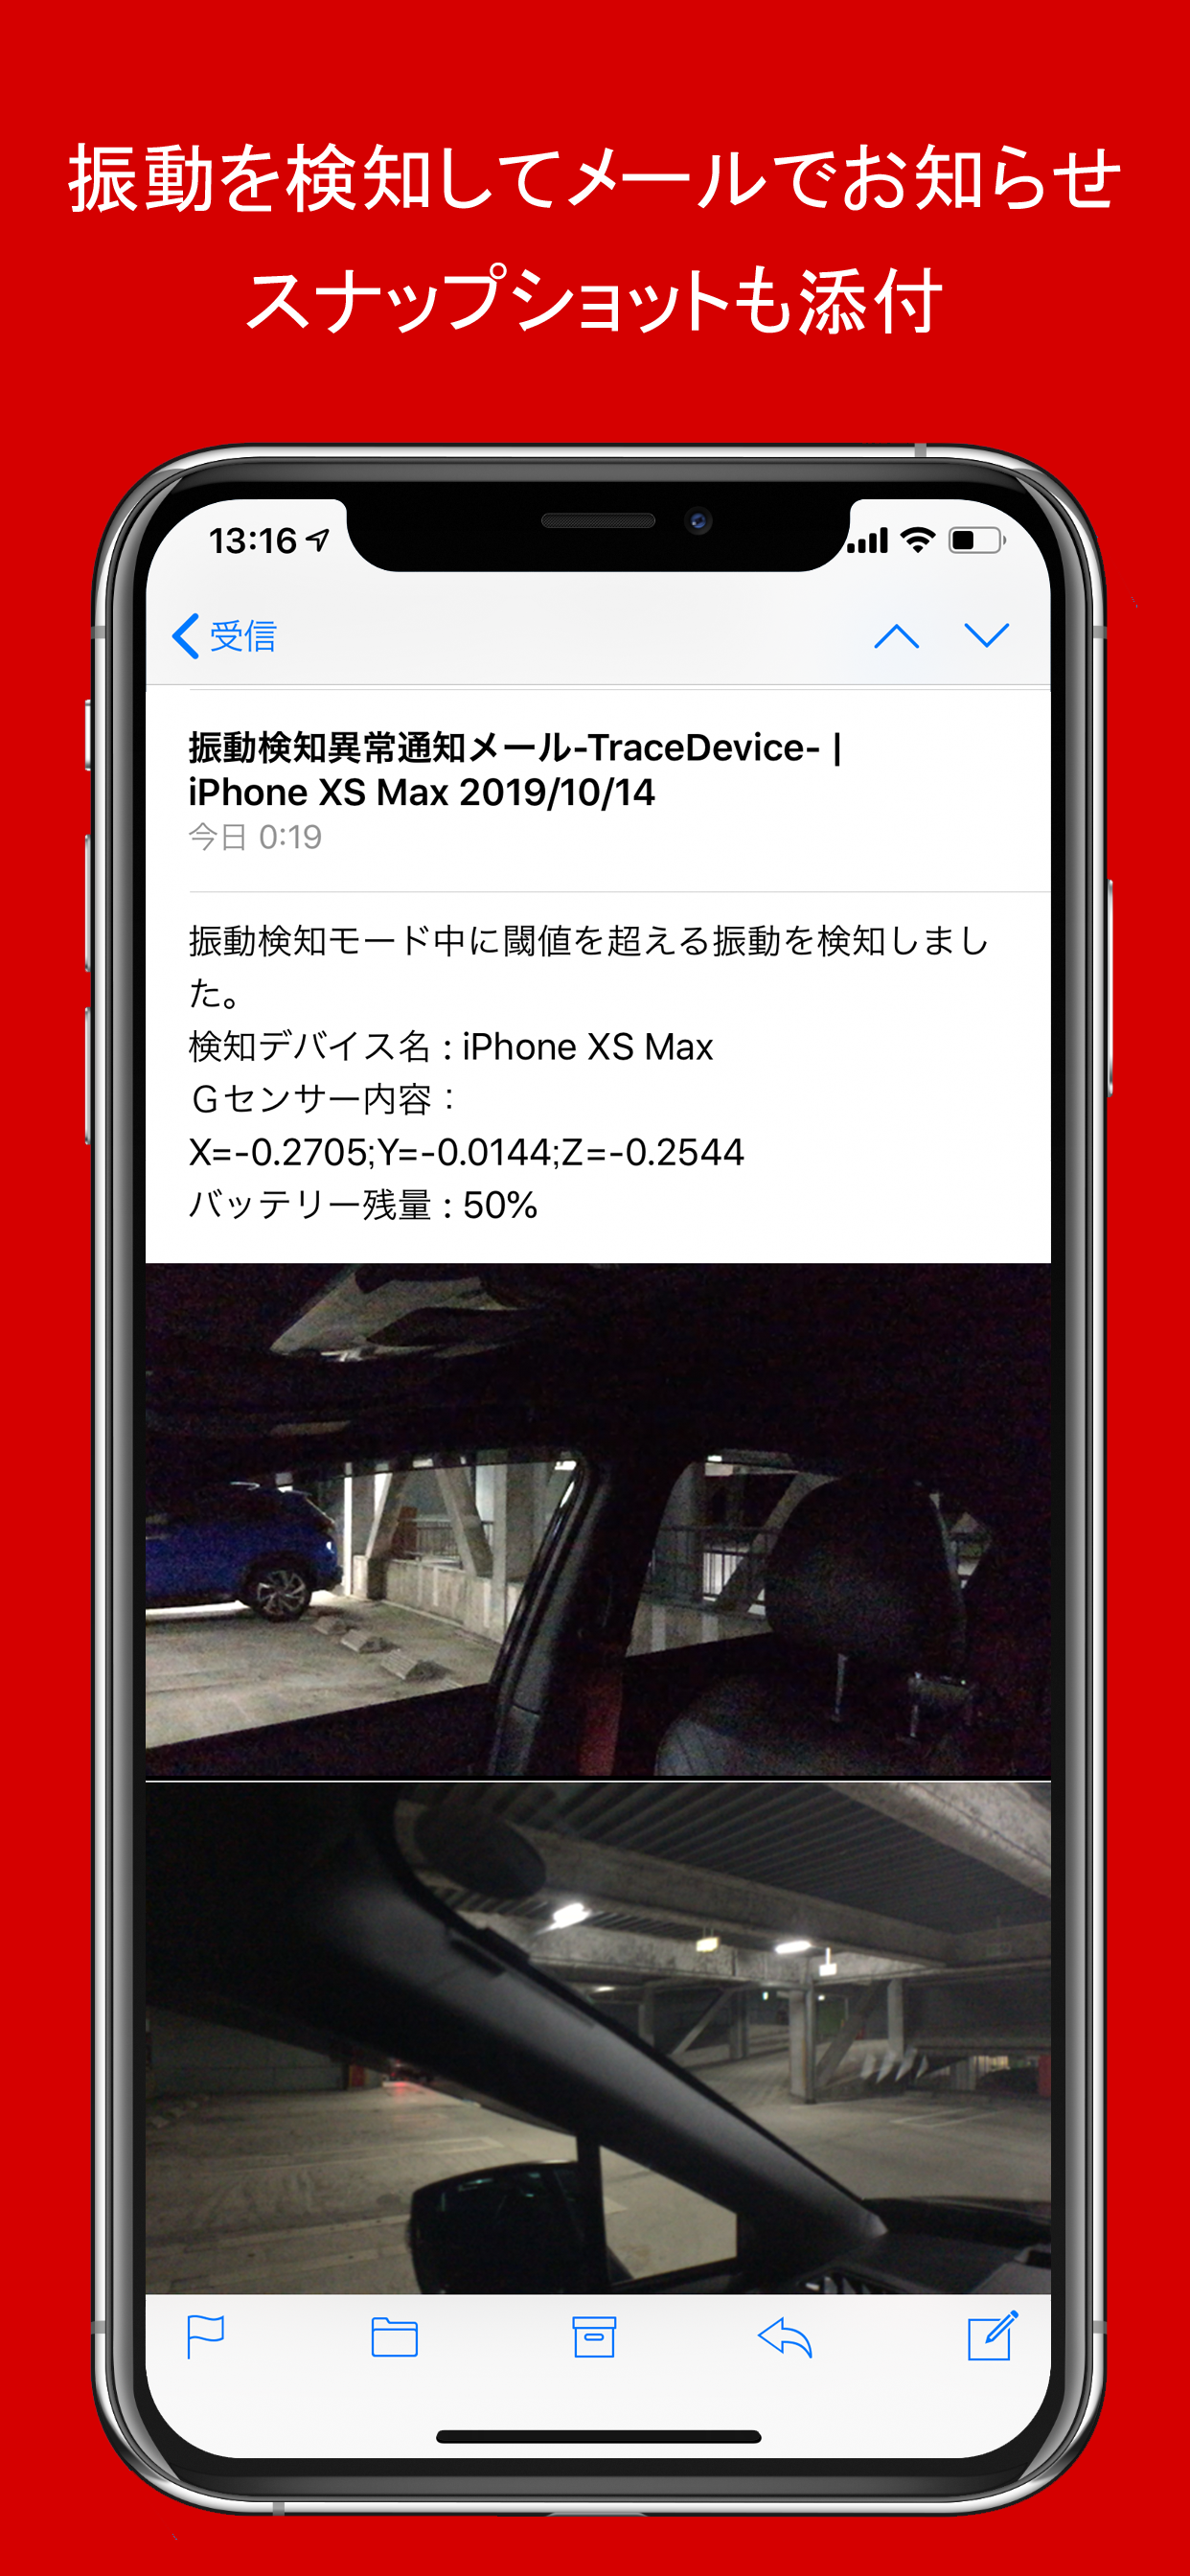 tracedevice_xs_max_image06.png